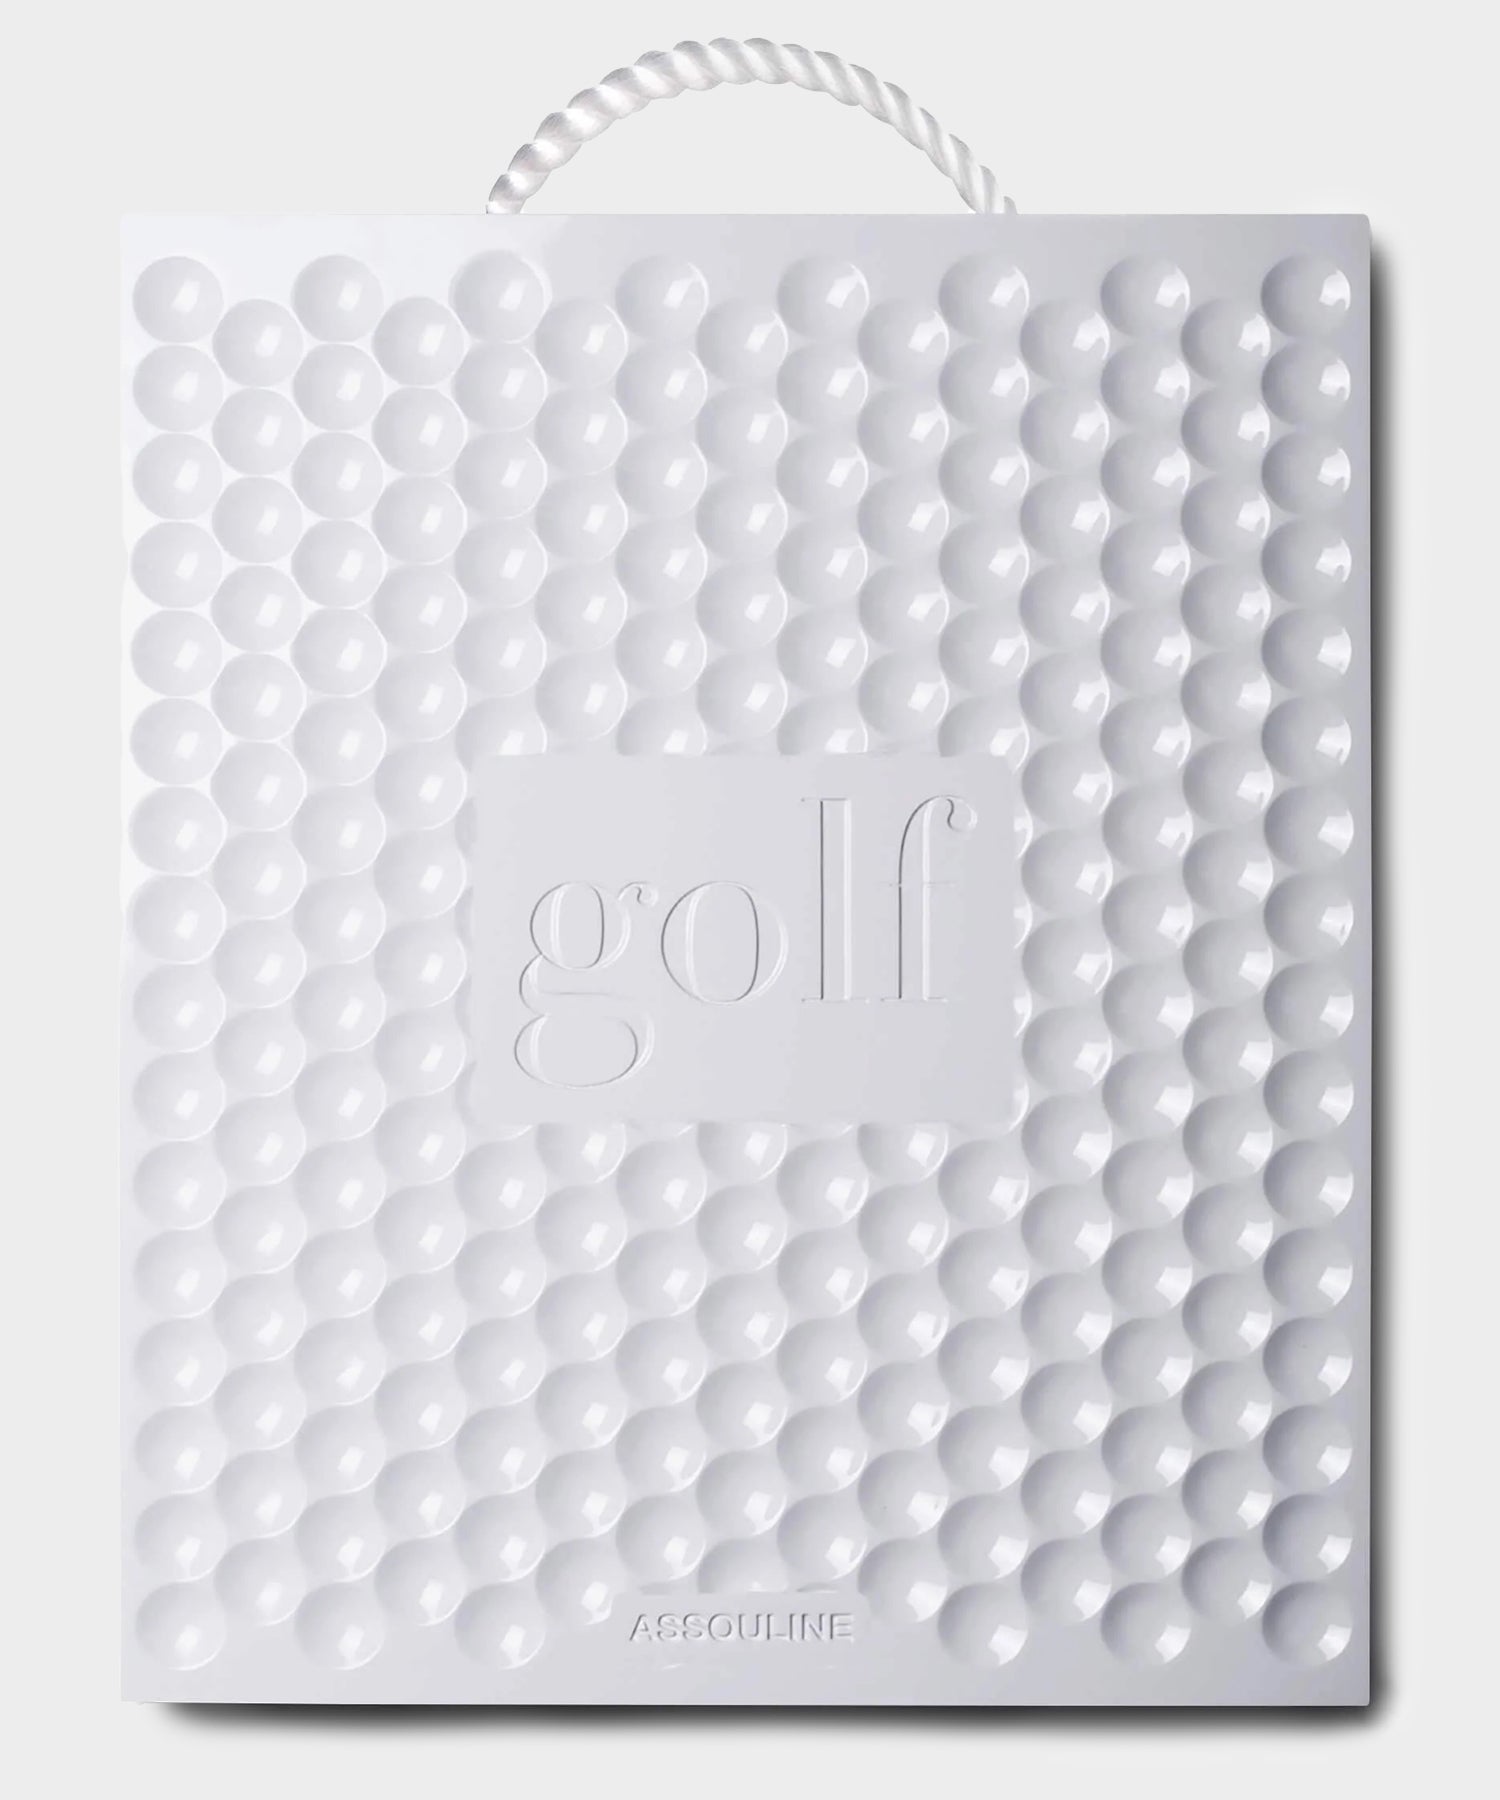 Assouline "The Impossible Collection Of Golf" Book